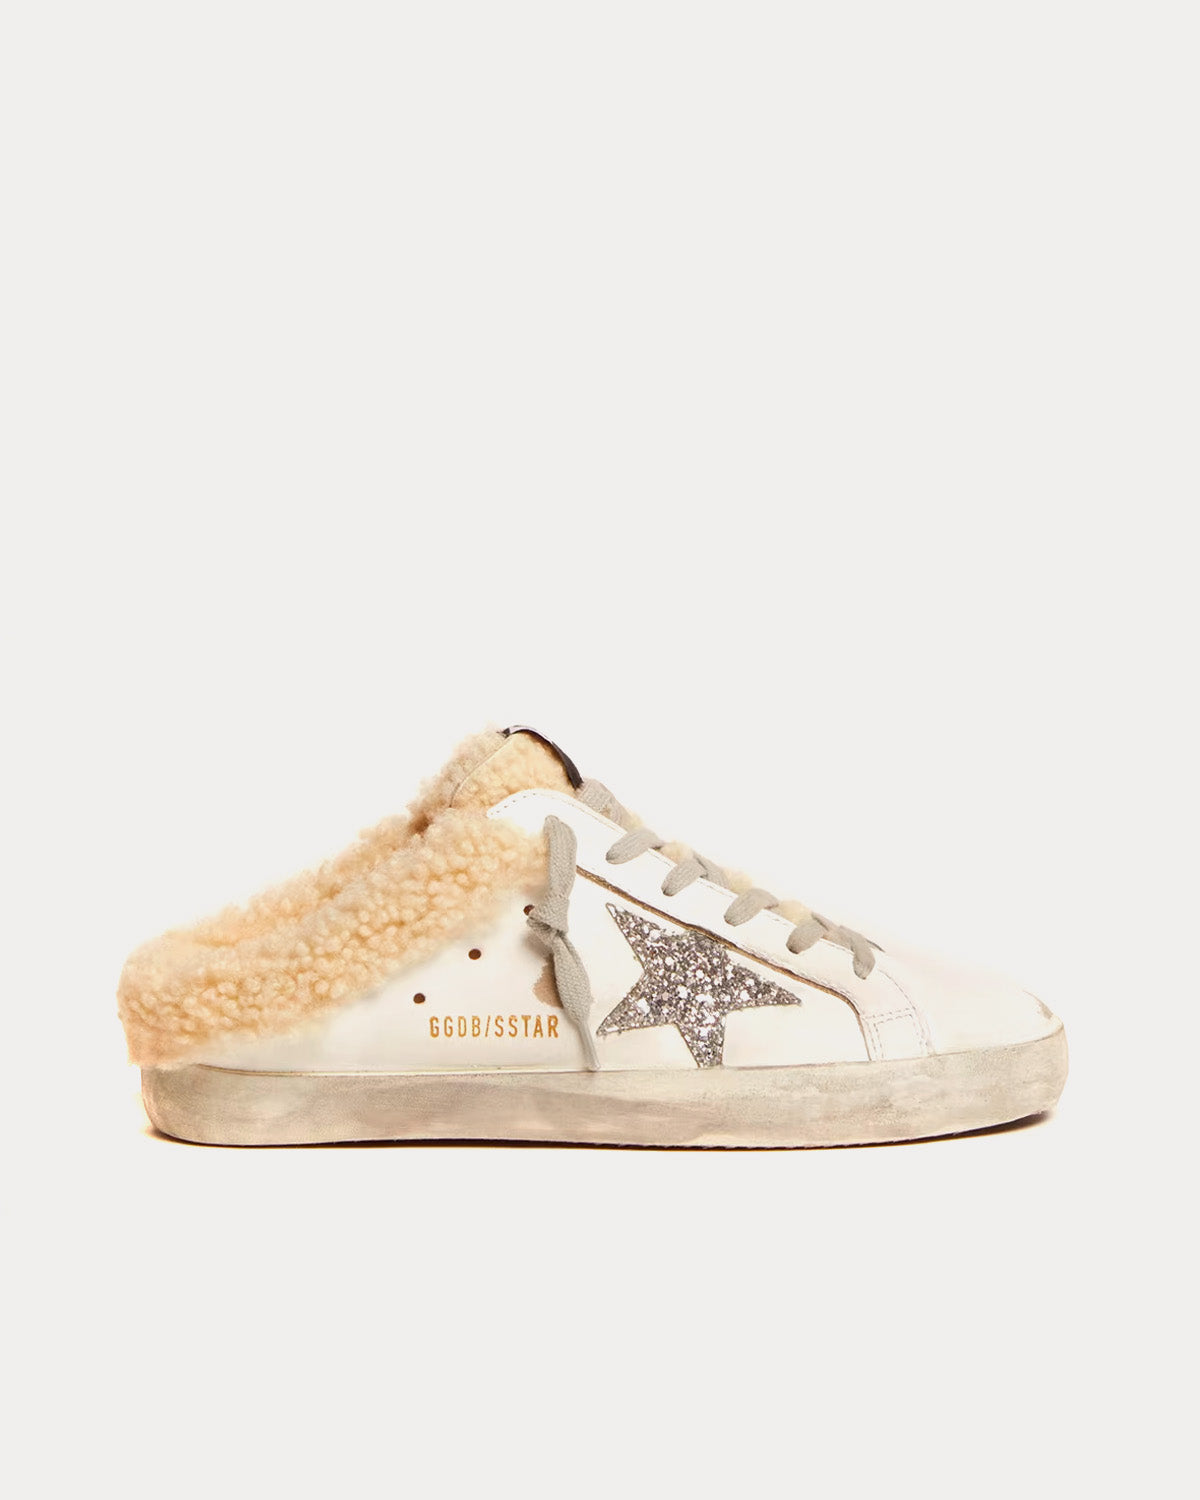 Golden Goose Super-Star Sabots Silver Glitter Star & Shearling Lining White  Low Top Sneakers - Sneak in Peace